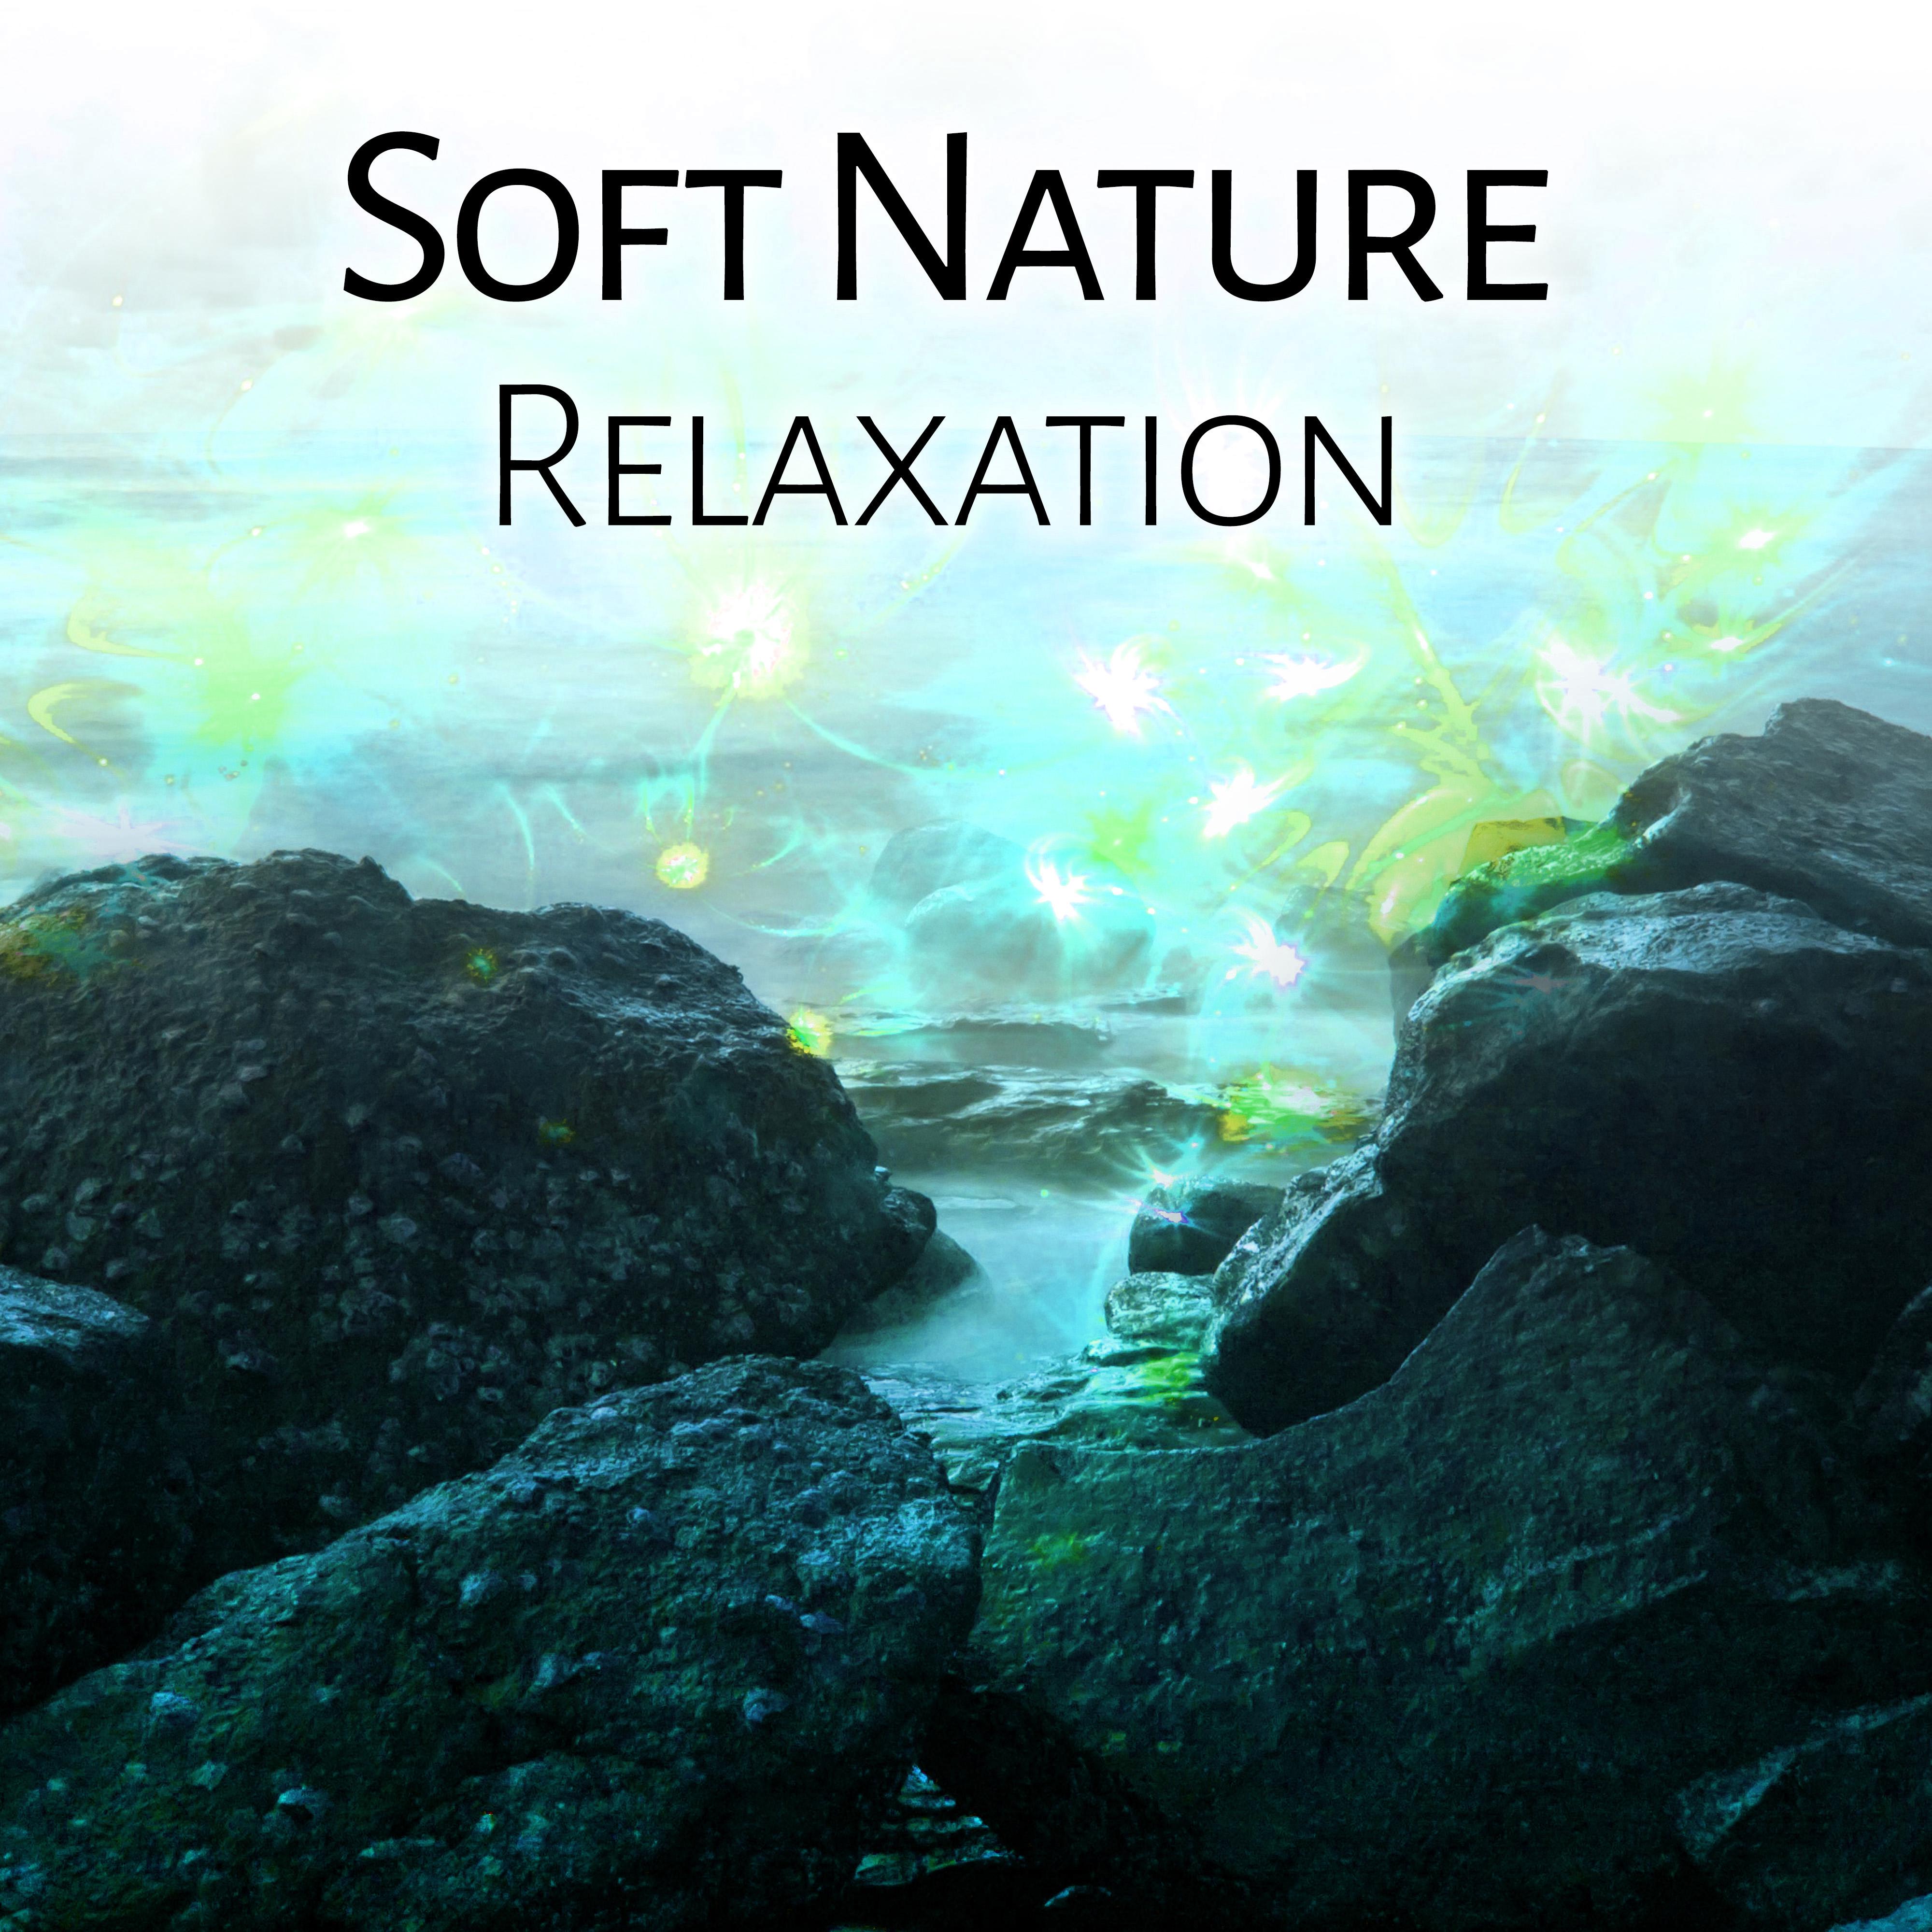 Soft Nature Relaxation  Calm Sounds, Nature Waves, Healing Music, New Age to Rest, Chilled Melodies